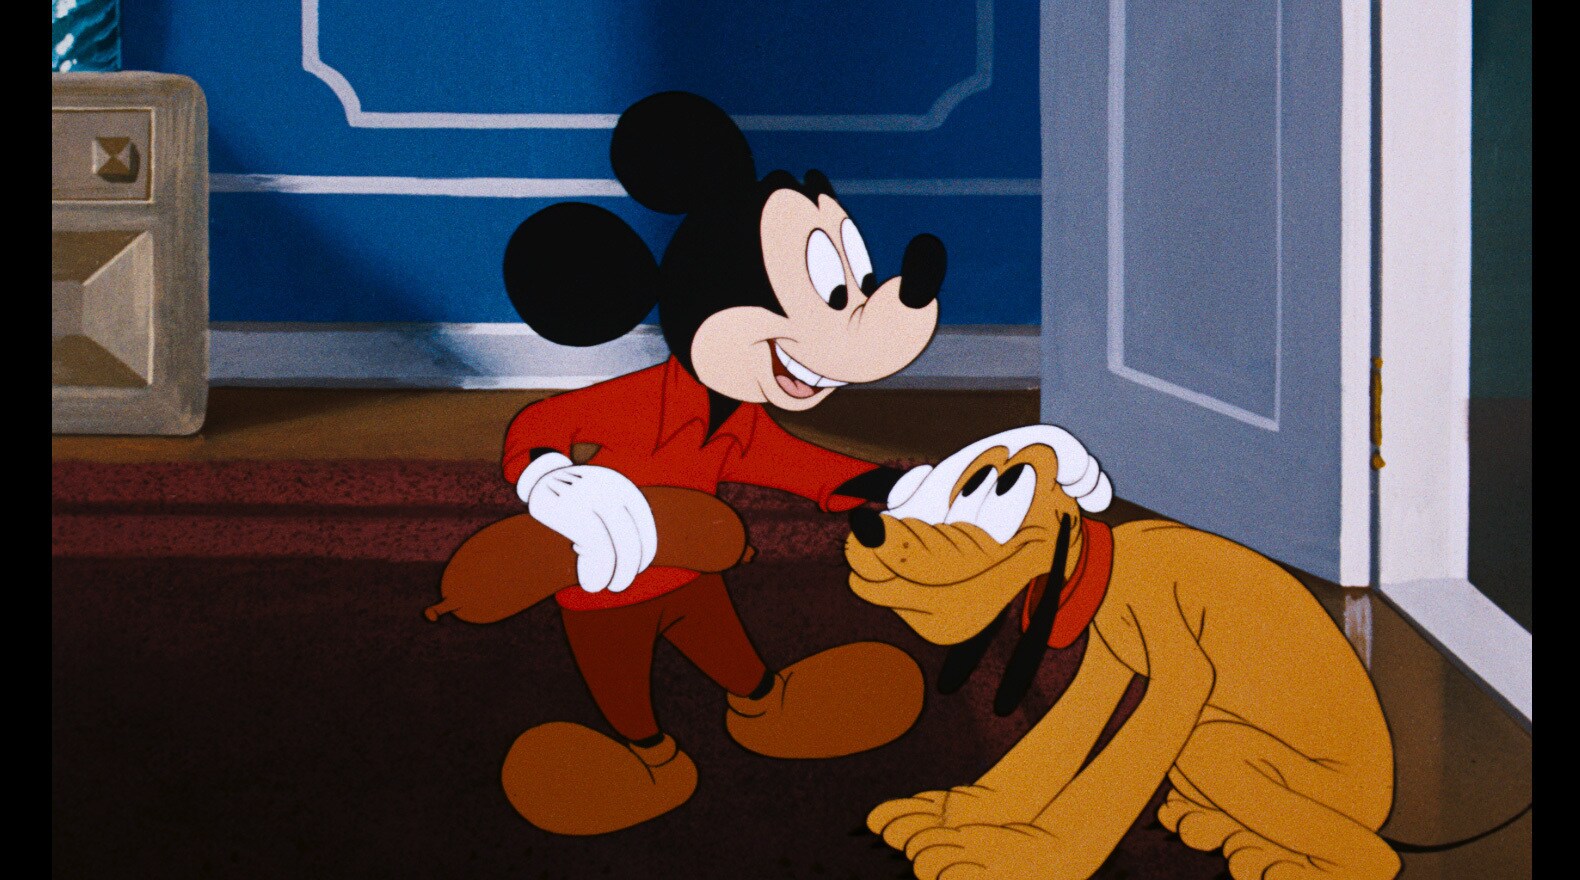 Pluto brings Mickey back a treat from the butcher store.